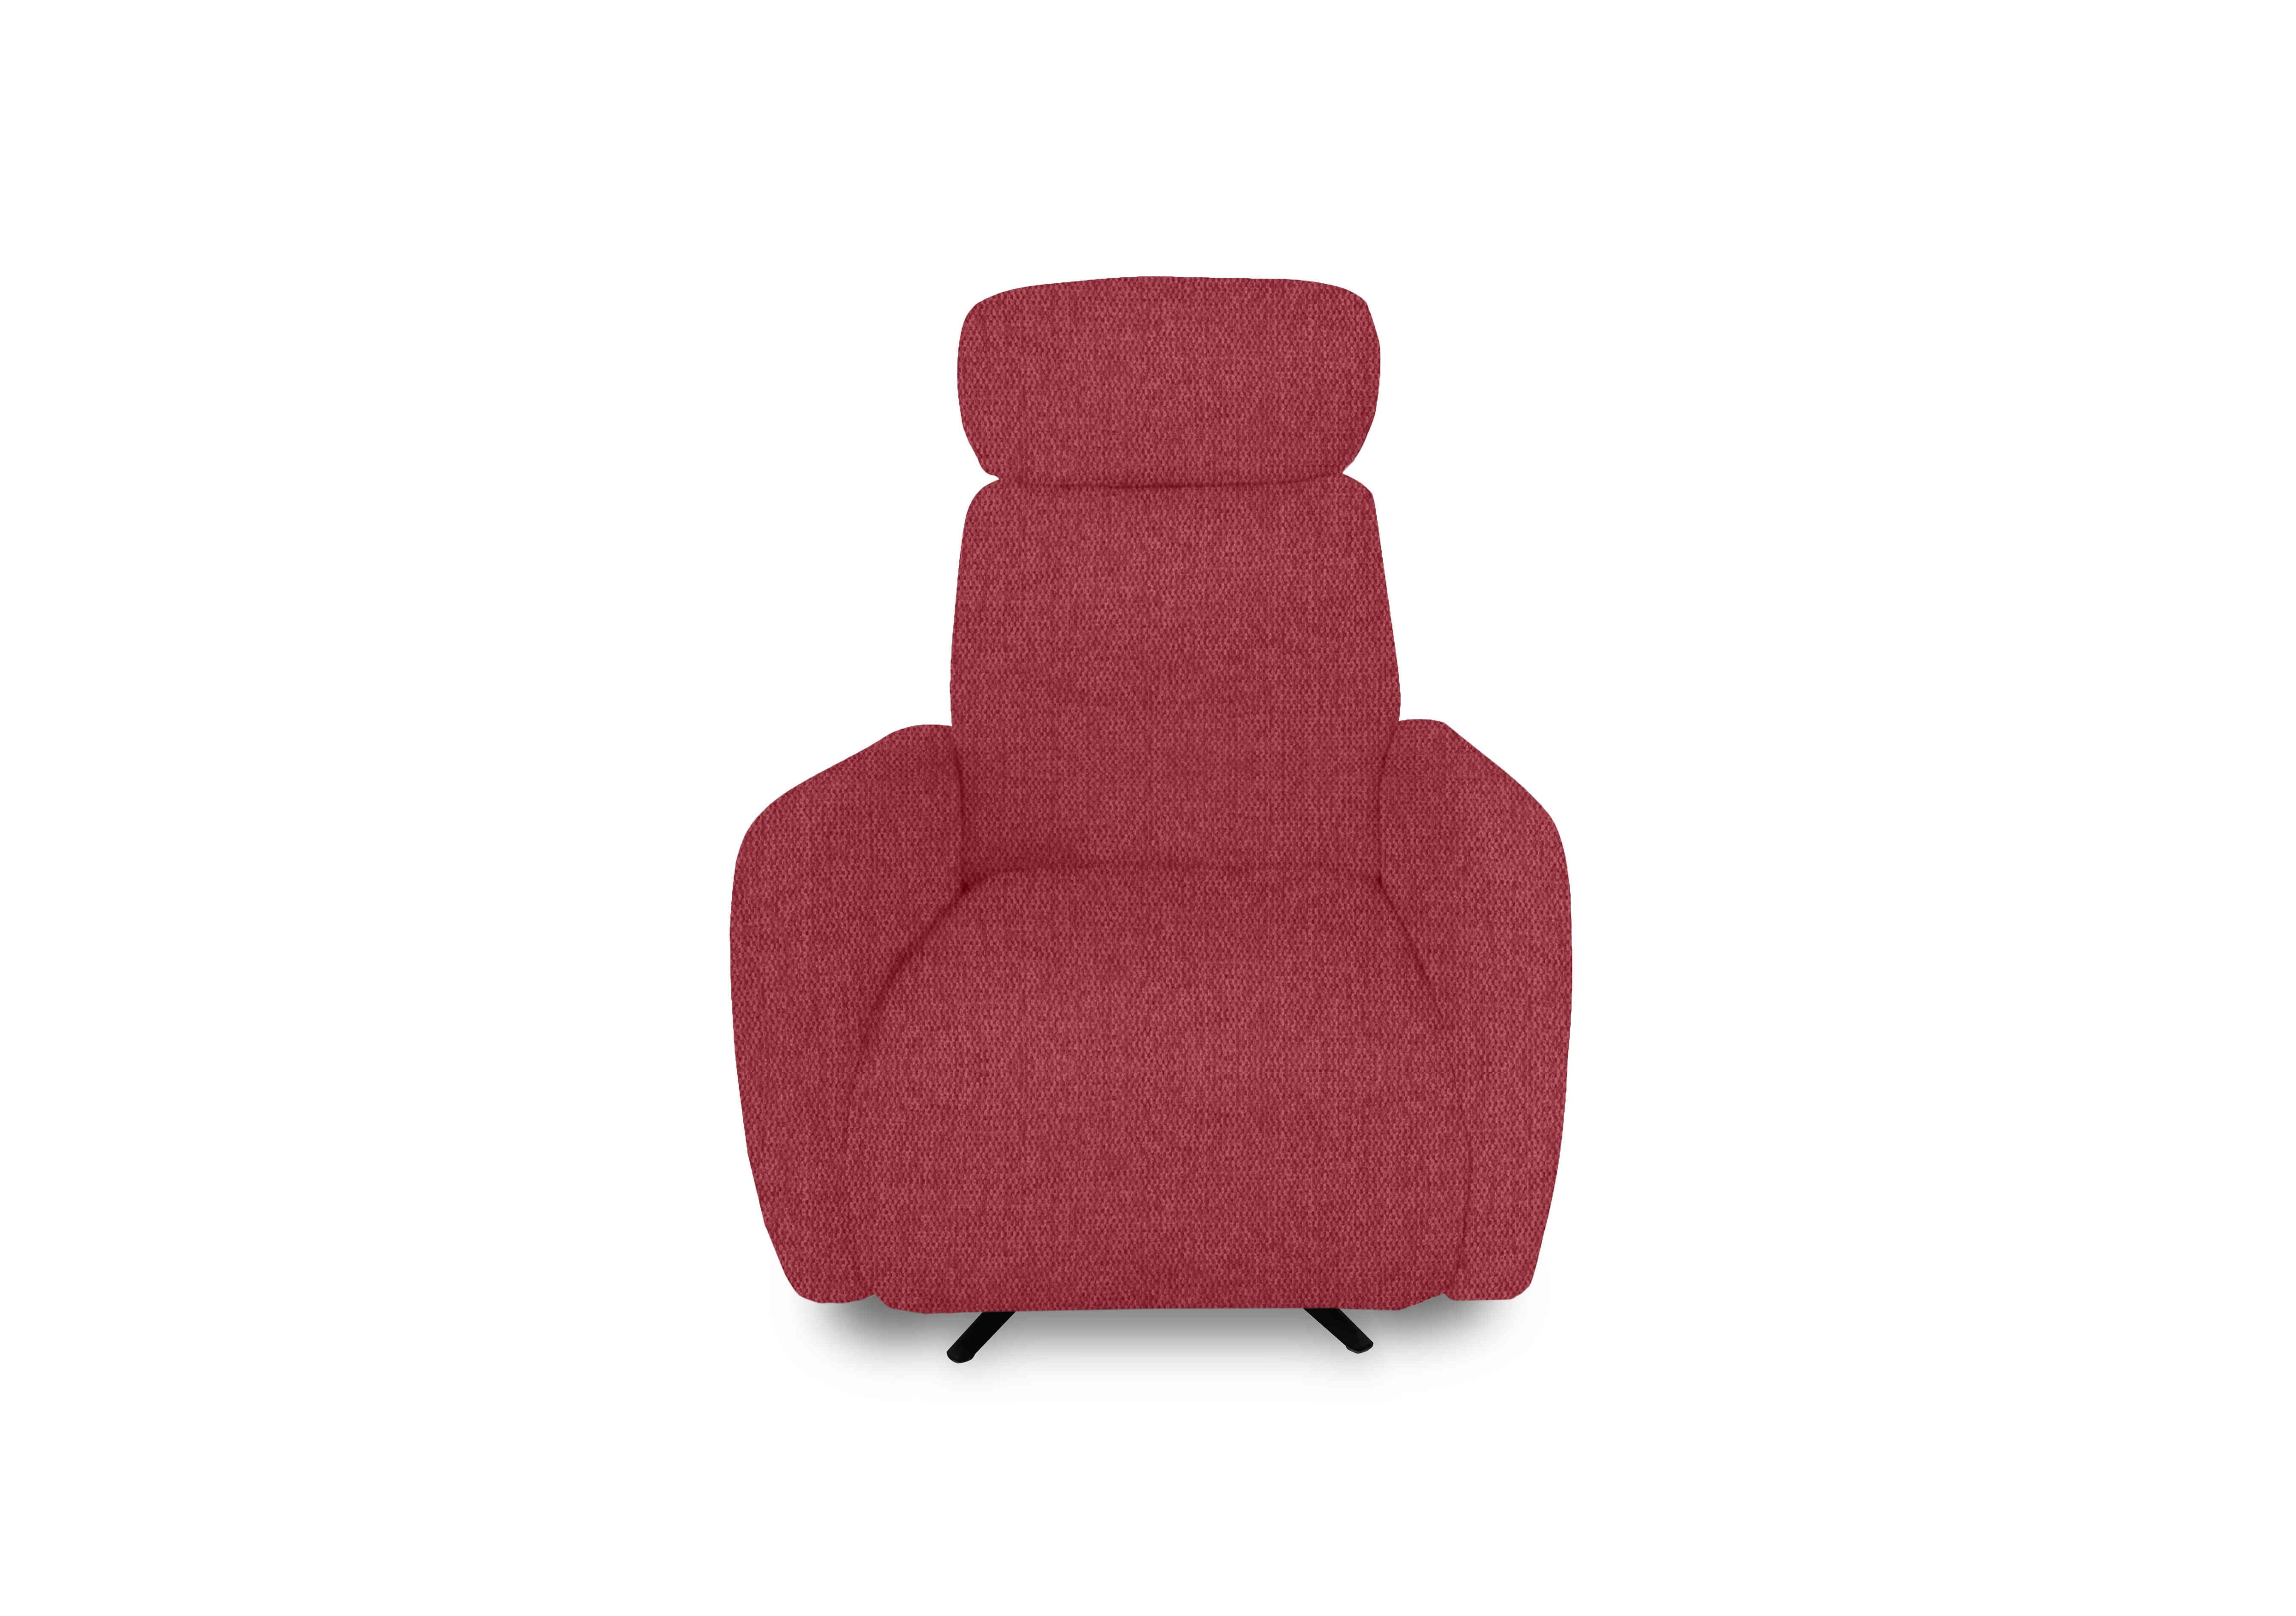 Designer Chair Collection Tokyo Fabric Manual Recliner Swivel Chair in Fab-Blt-R29 Red on Furniture Village